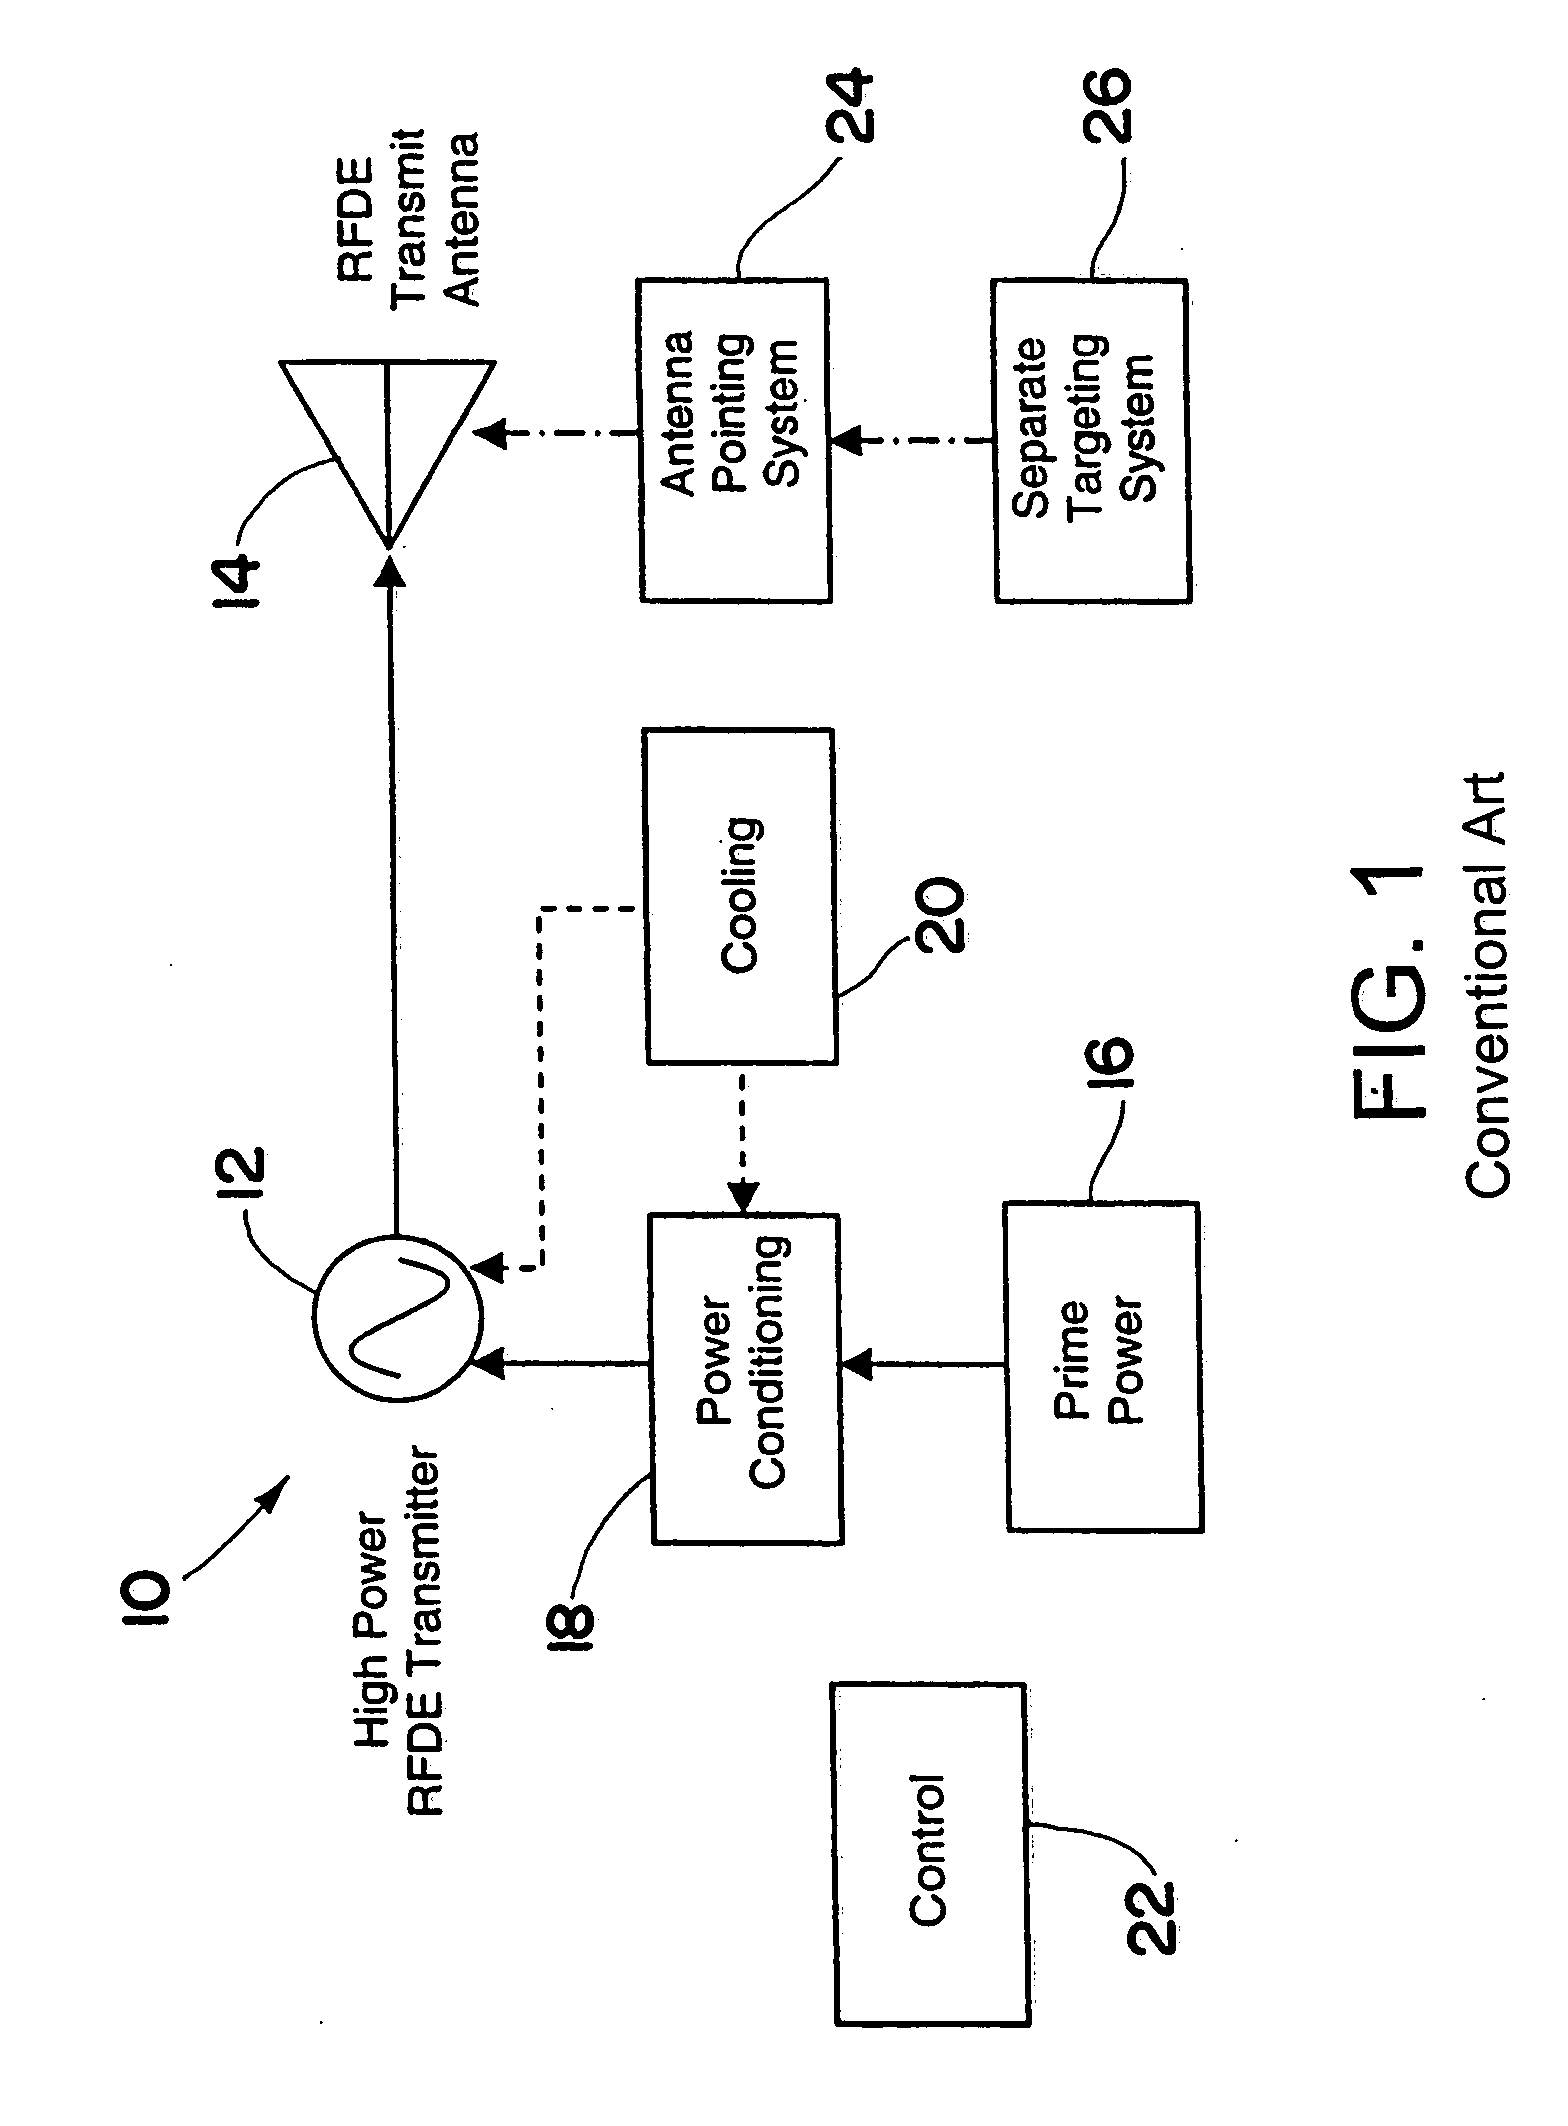 Multifunctional radio frequency directed energy system